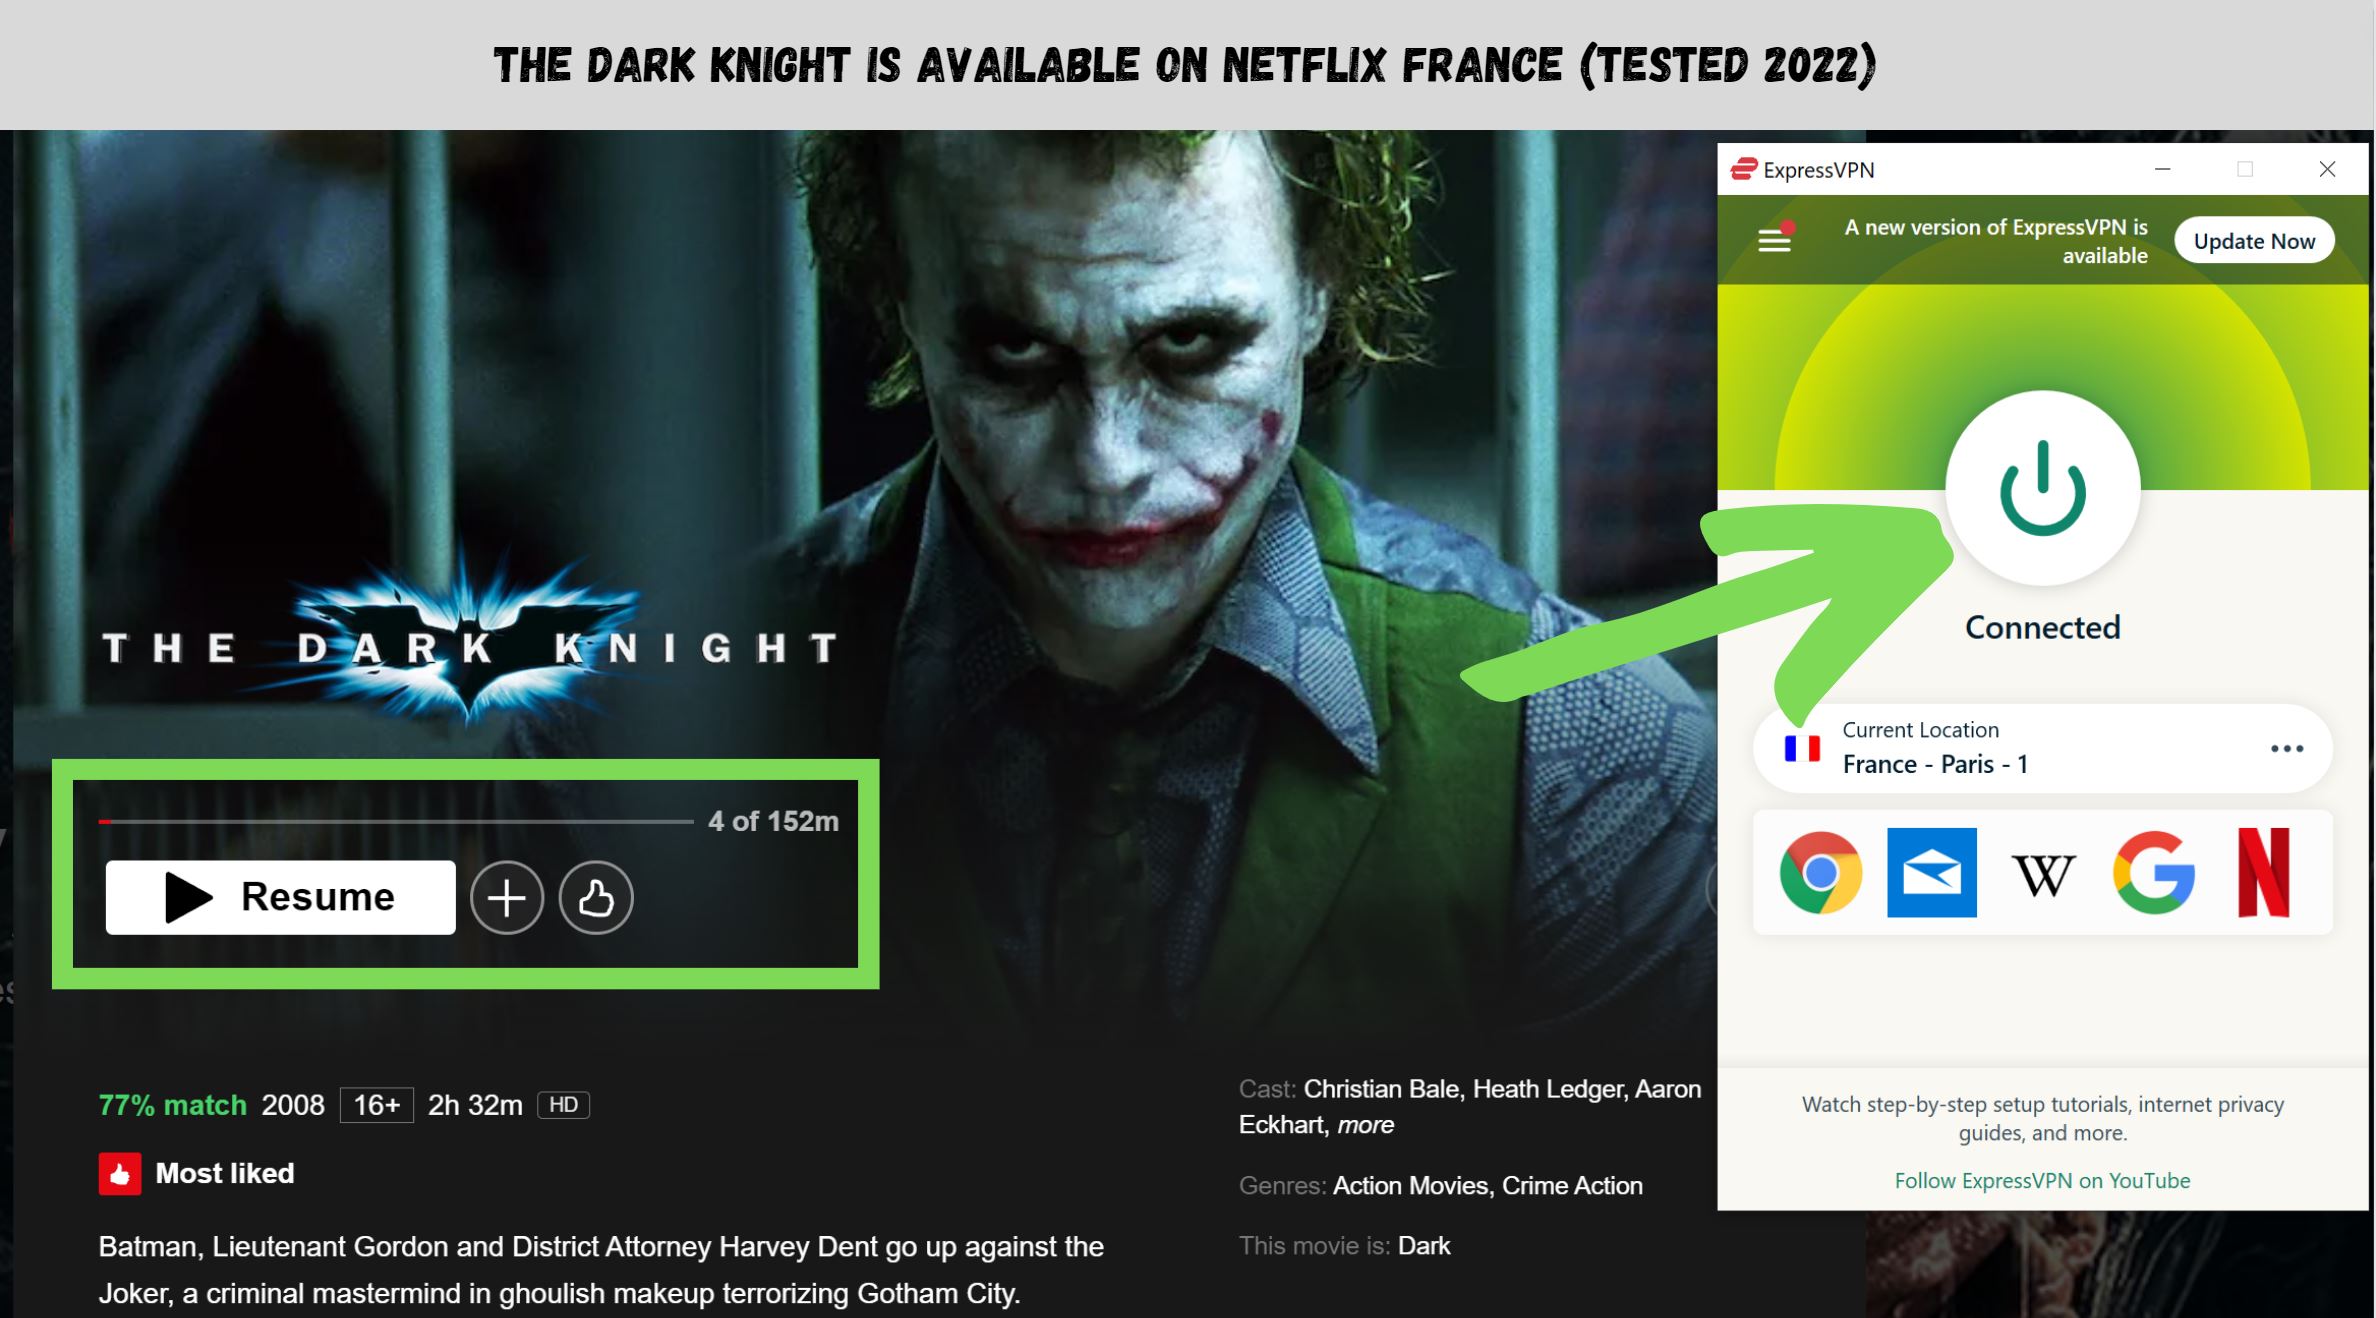 How To Watch The Dark Knight Trilogy On Netflix| Tested 2022